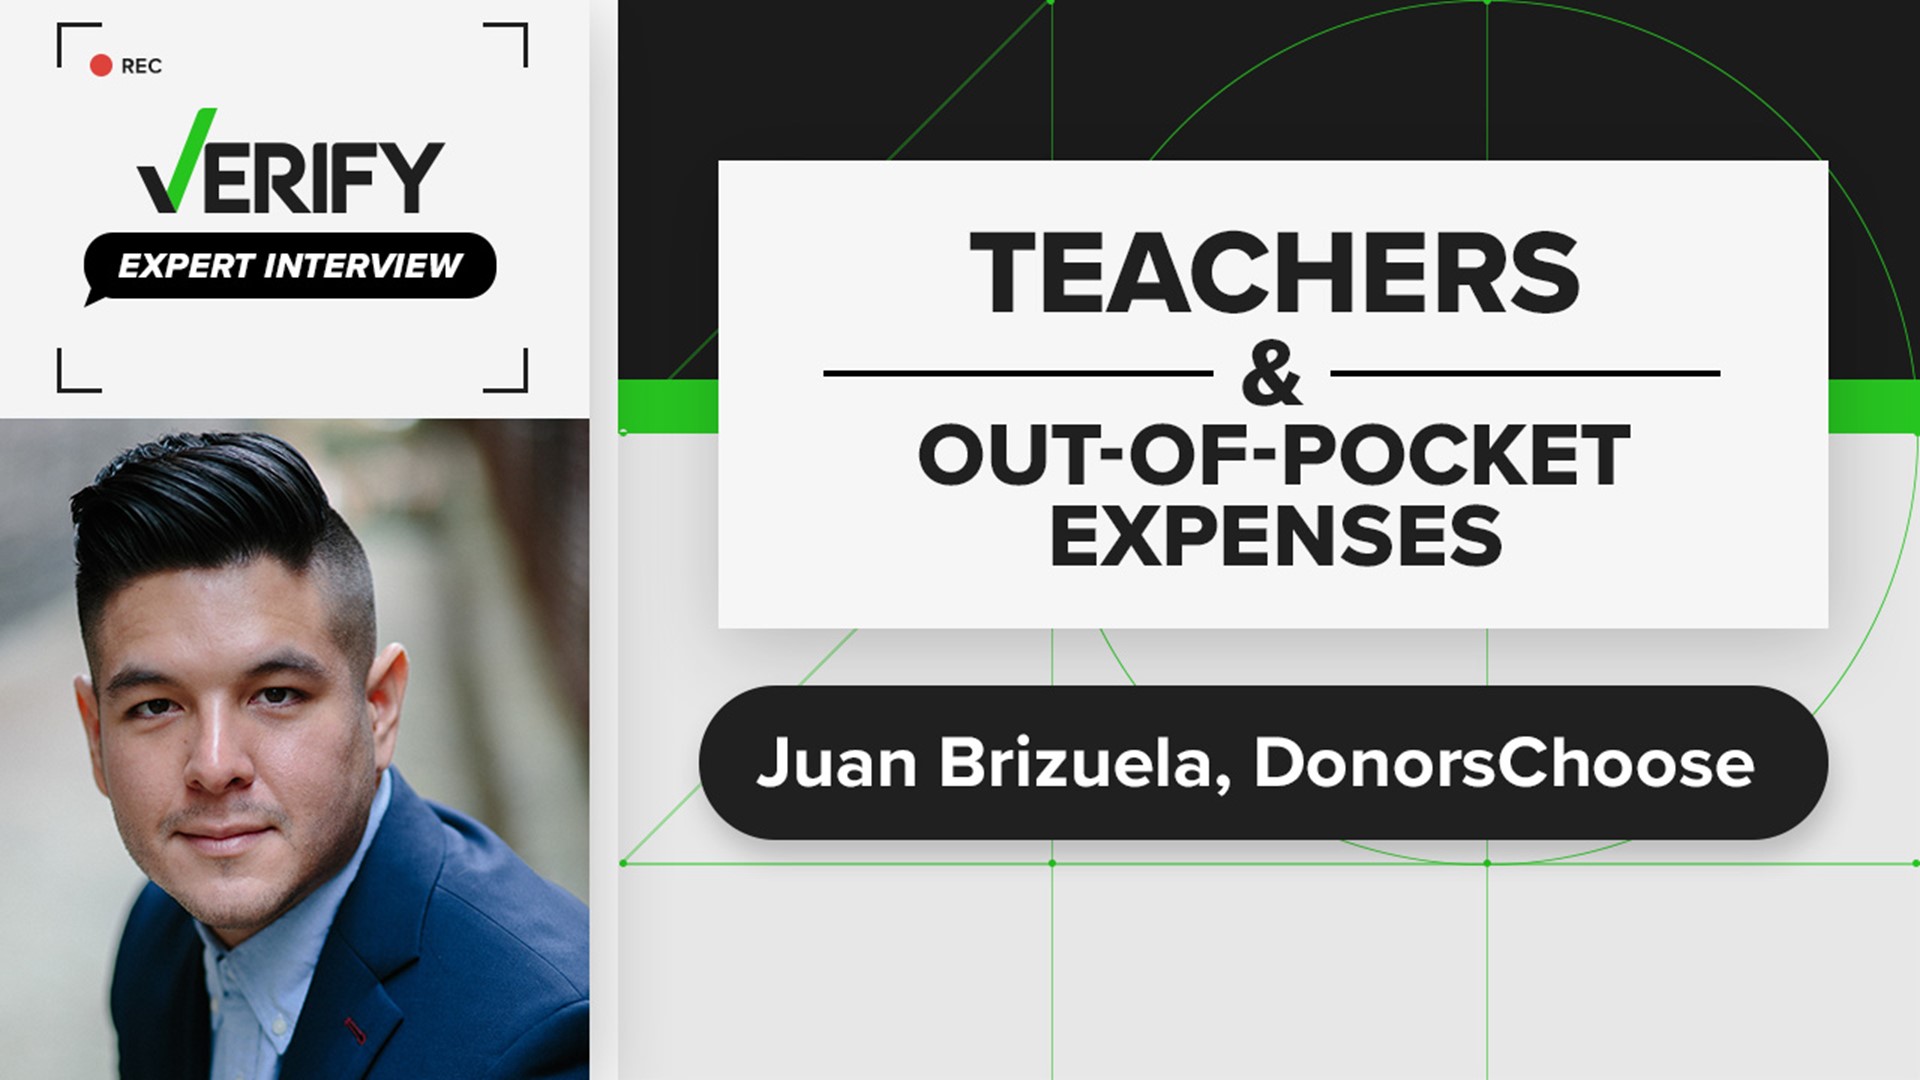 Classroom supplies can get expensive especially when teachers have to pay for them on their own. DonorsChoose Manager Juan Brizuela chat with VERIFY about the issue